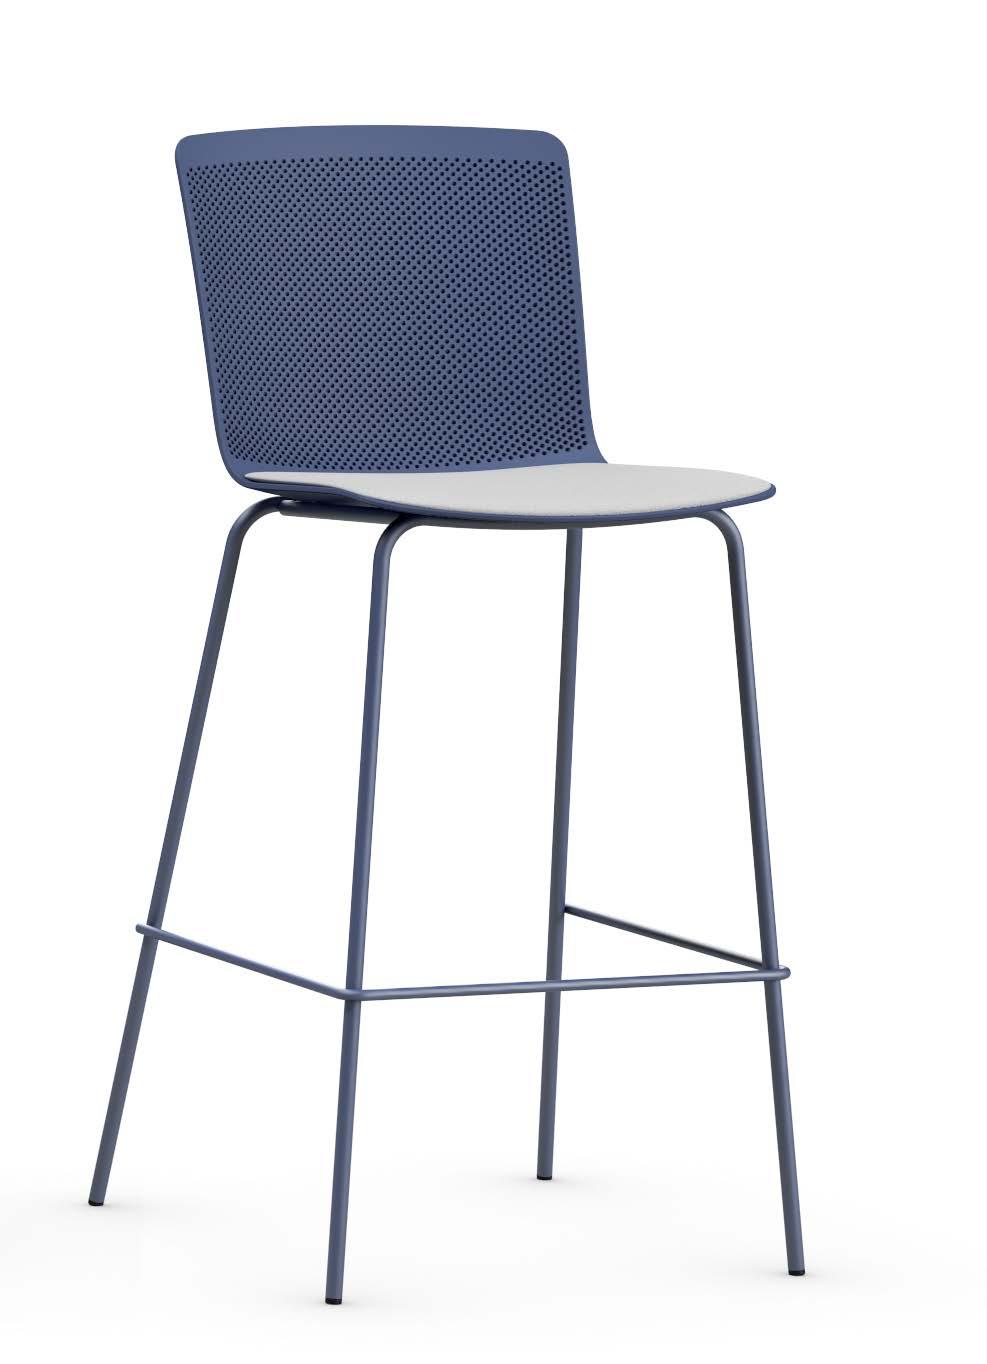 STATIONARY CHAIR HIGH Perforated polypropylene (variable thickness of 6-8 mm) Fully upholstered (foam thickness of 5 mm) Wooden (10 mm thick beech polylaminated) Seat Without upholstery